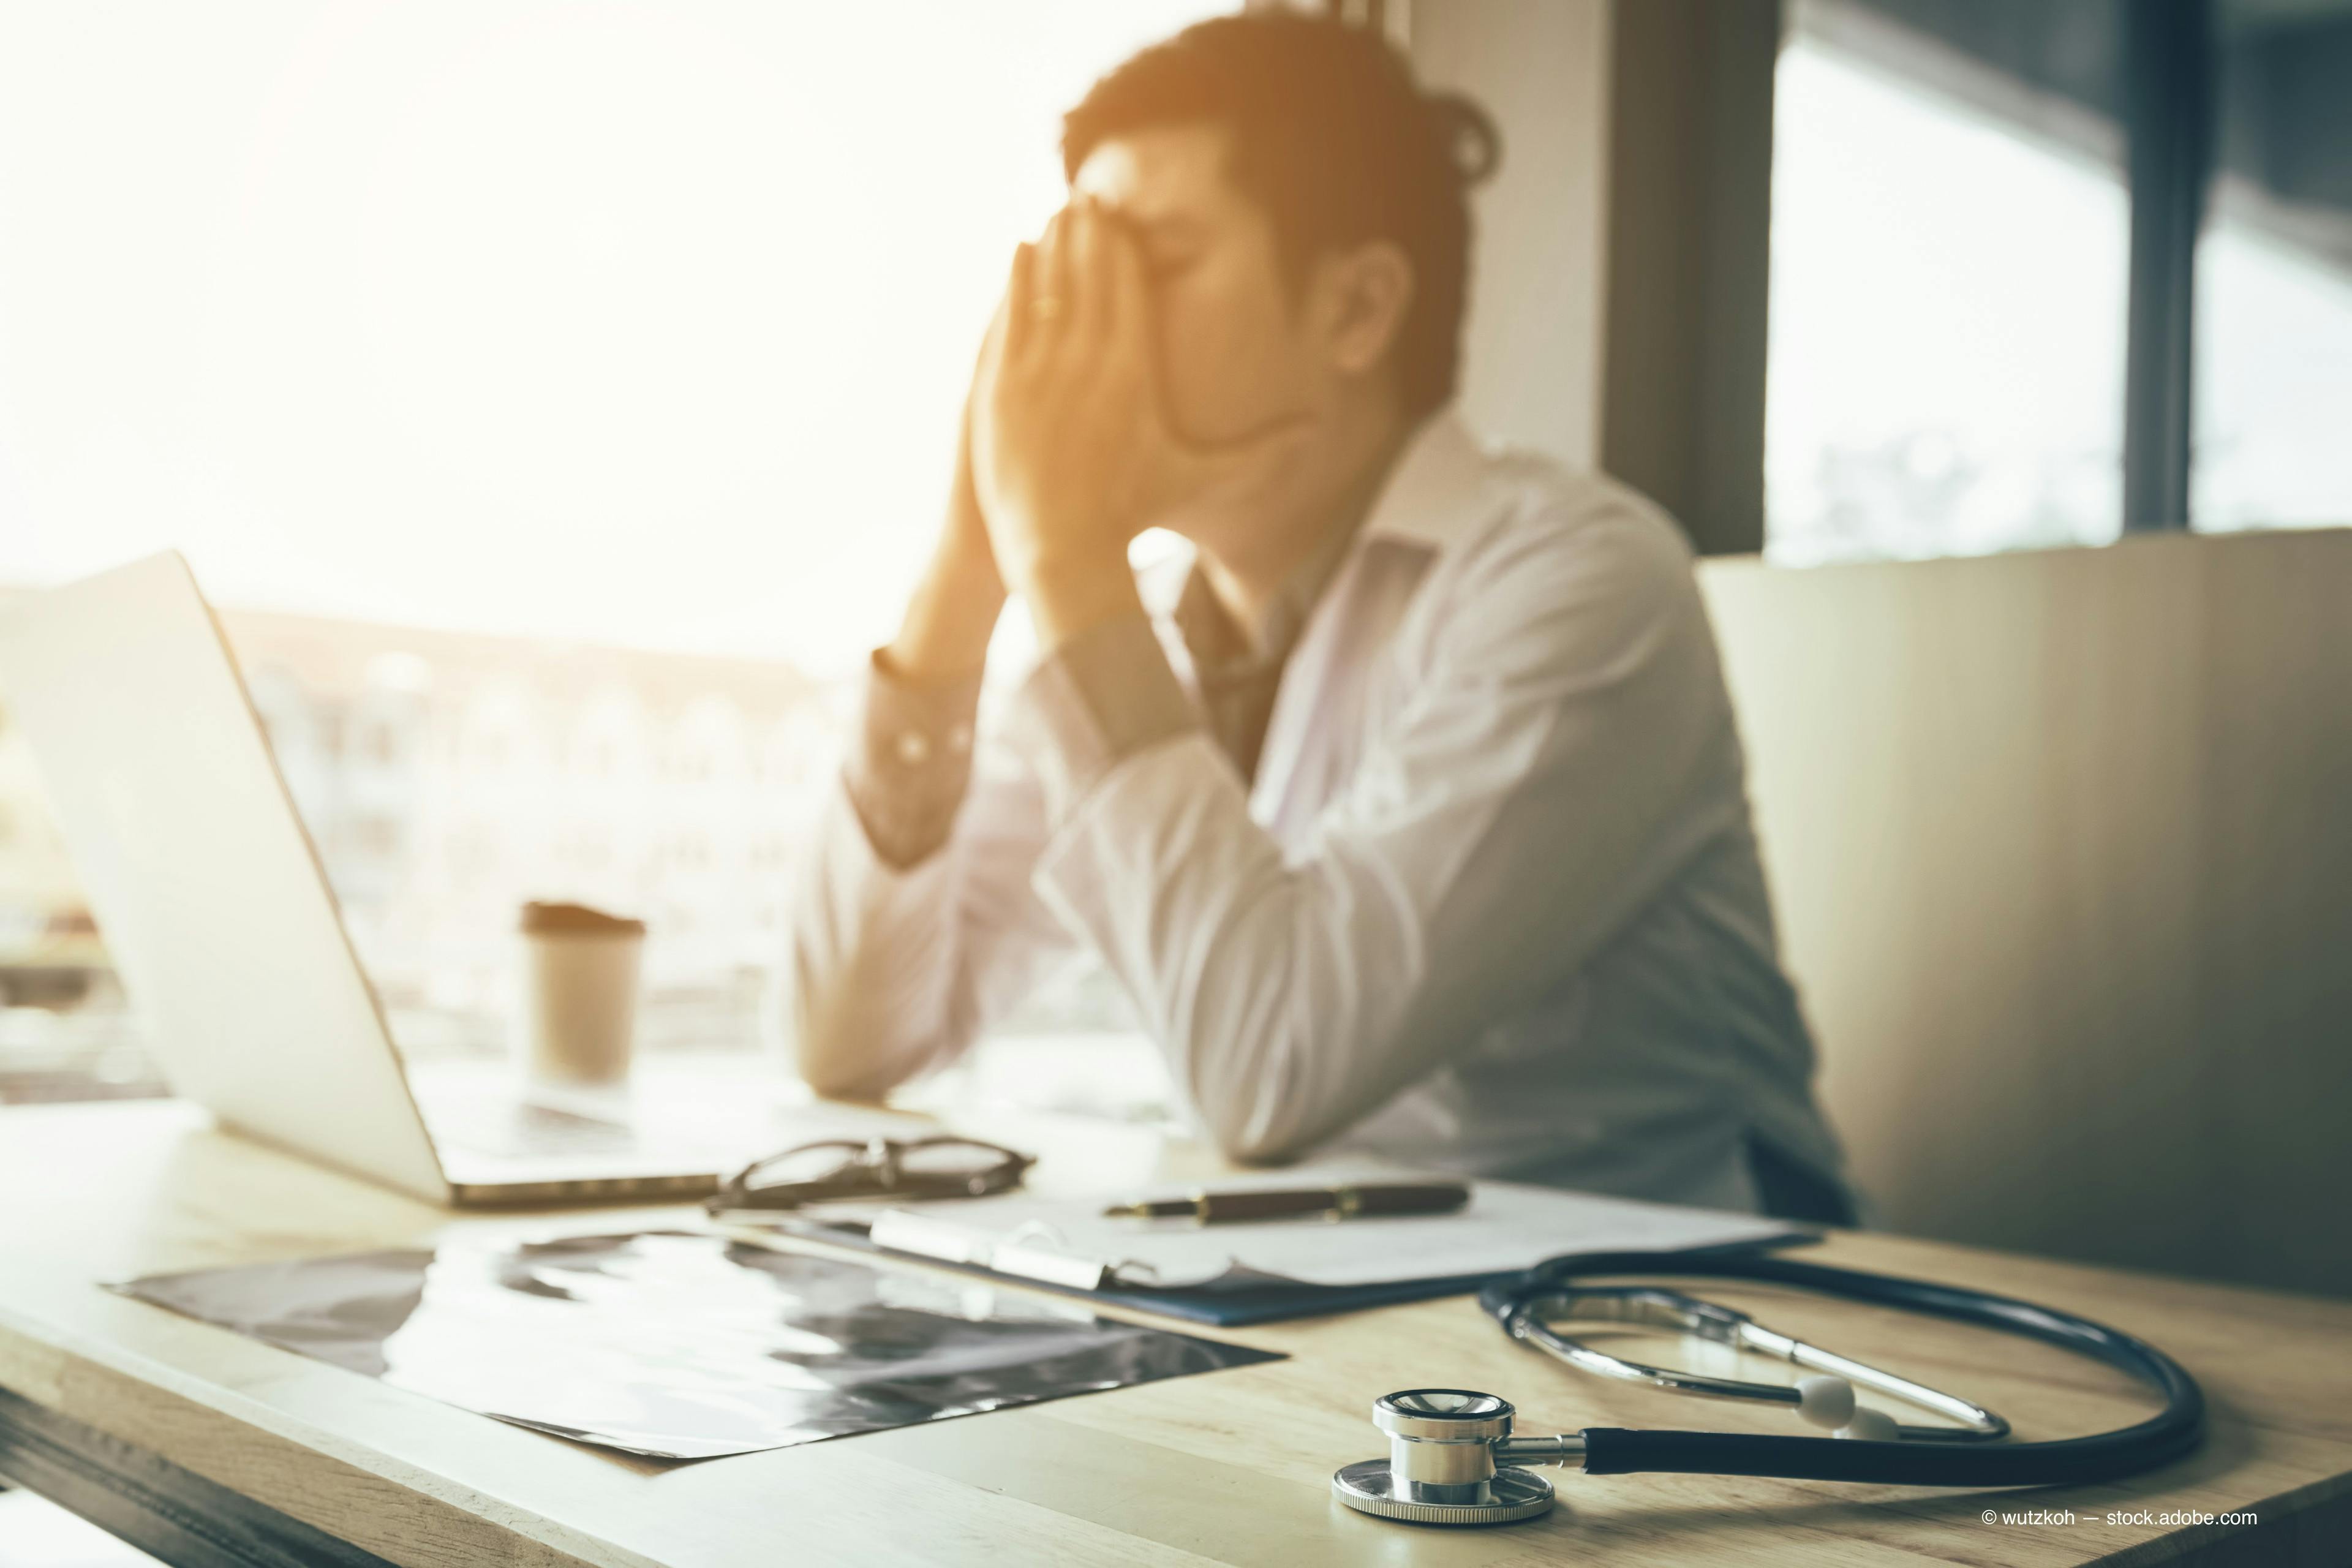 Burnout is now an official medical diagnosis, according to WHO